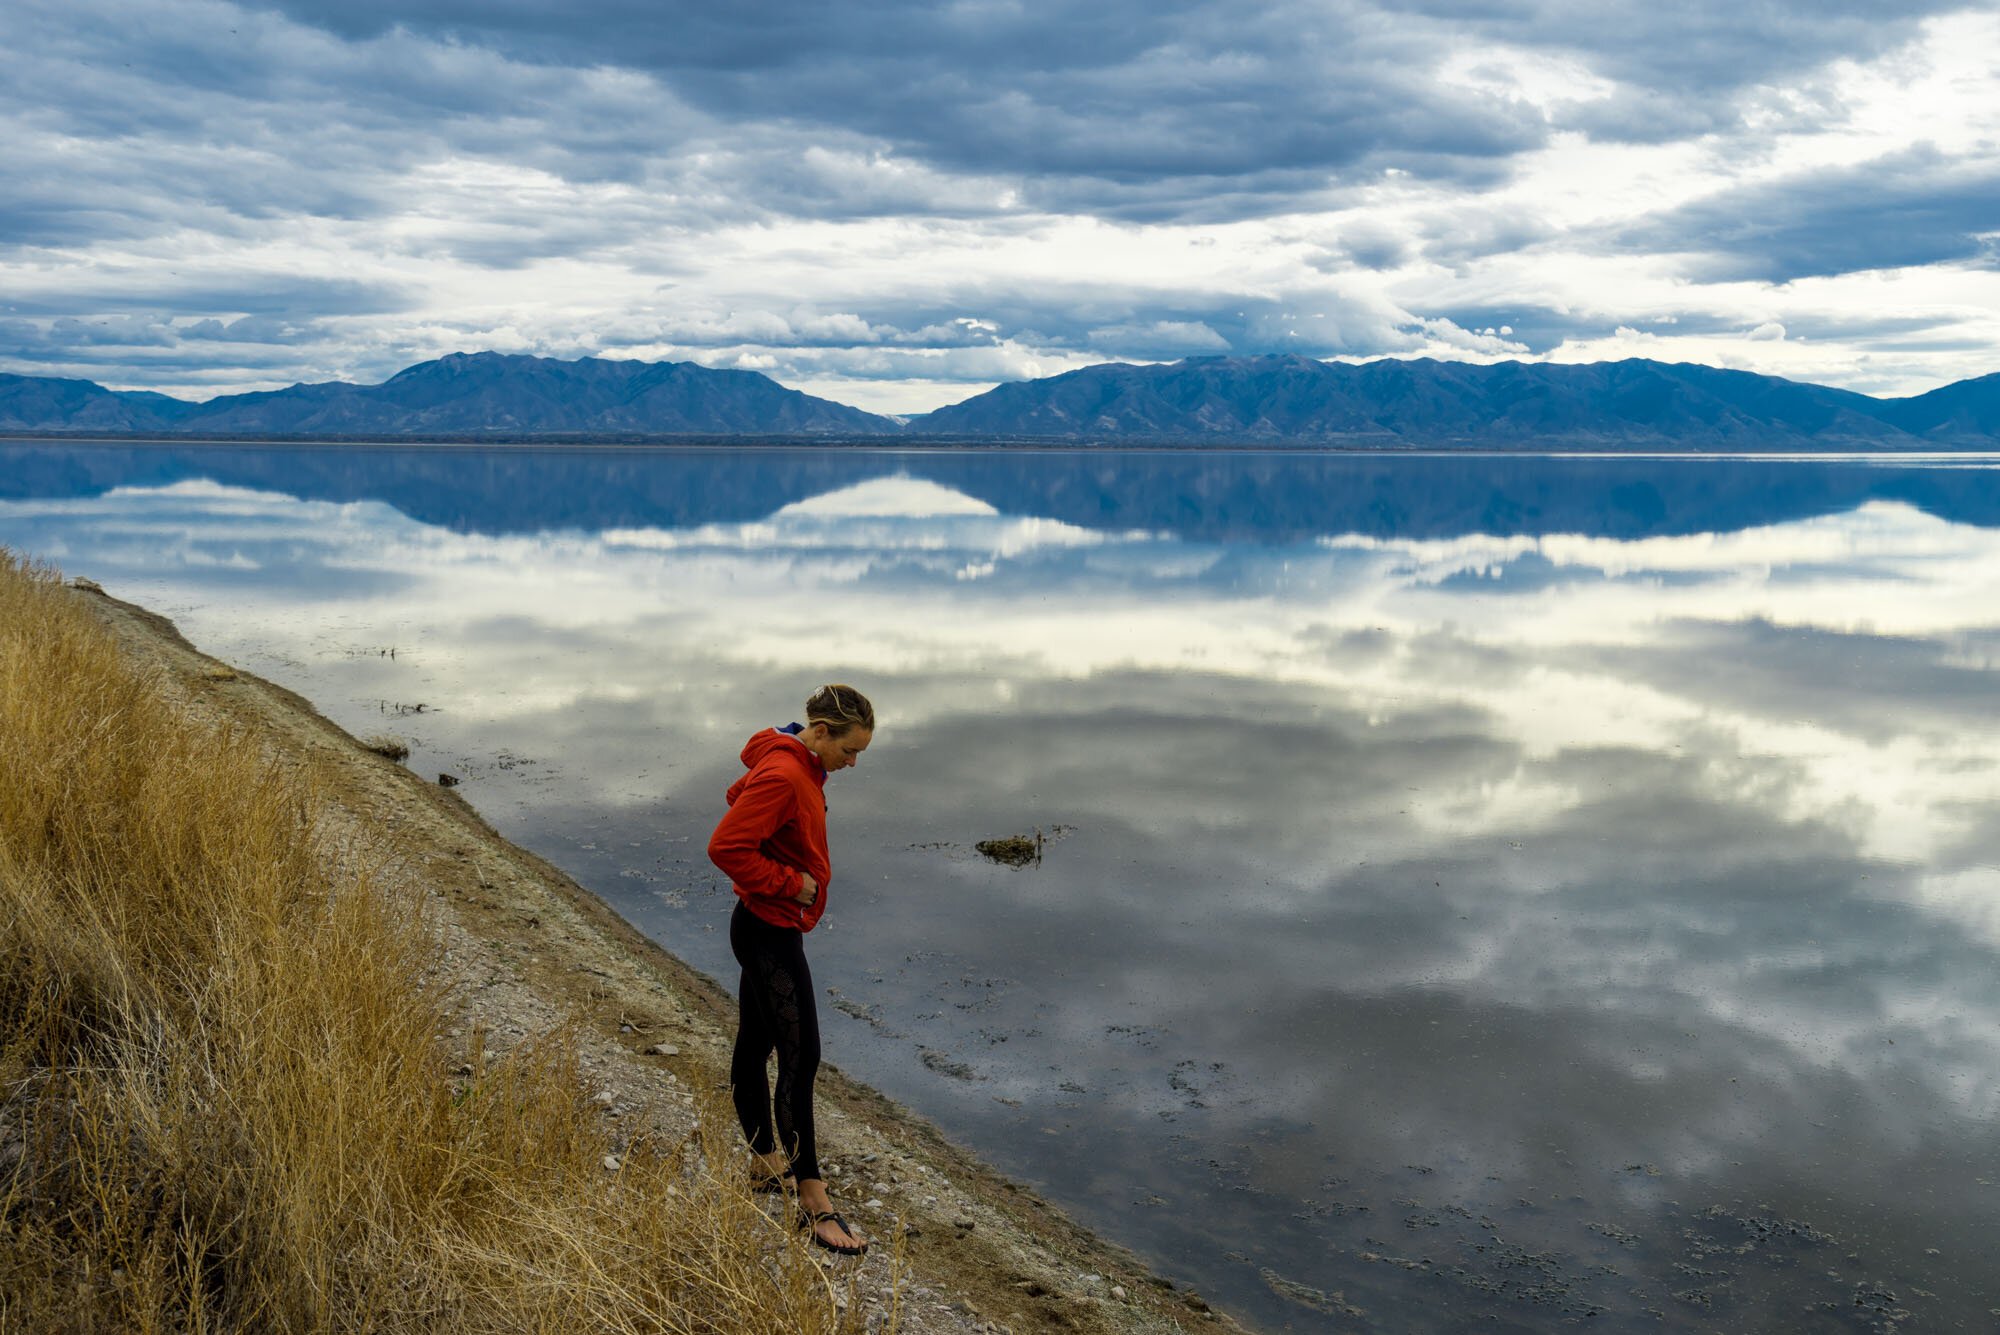 The reflections in the water on Antelope Island 